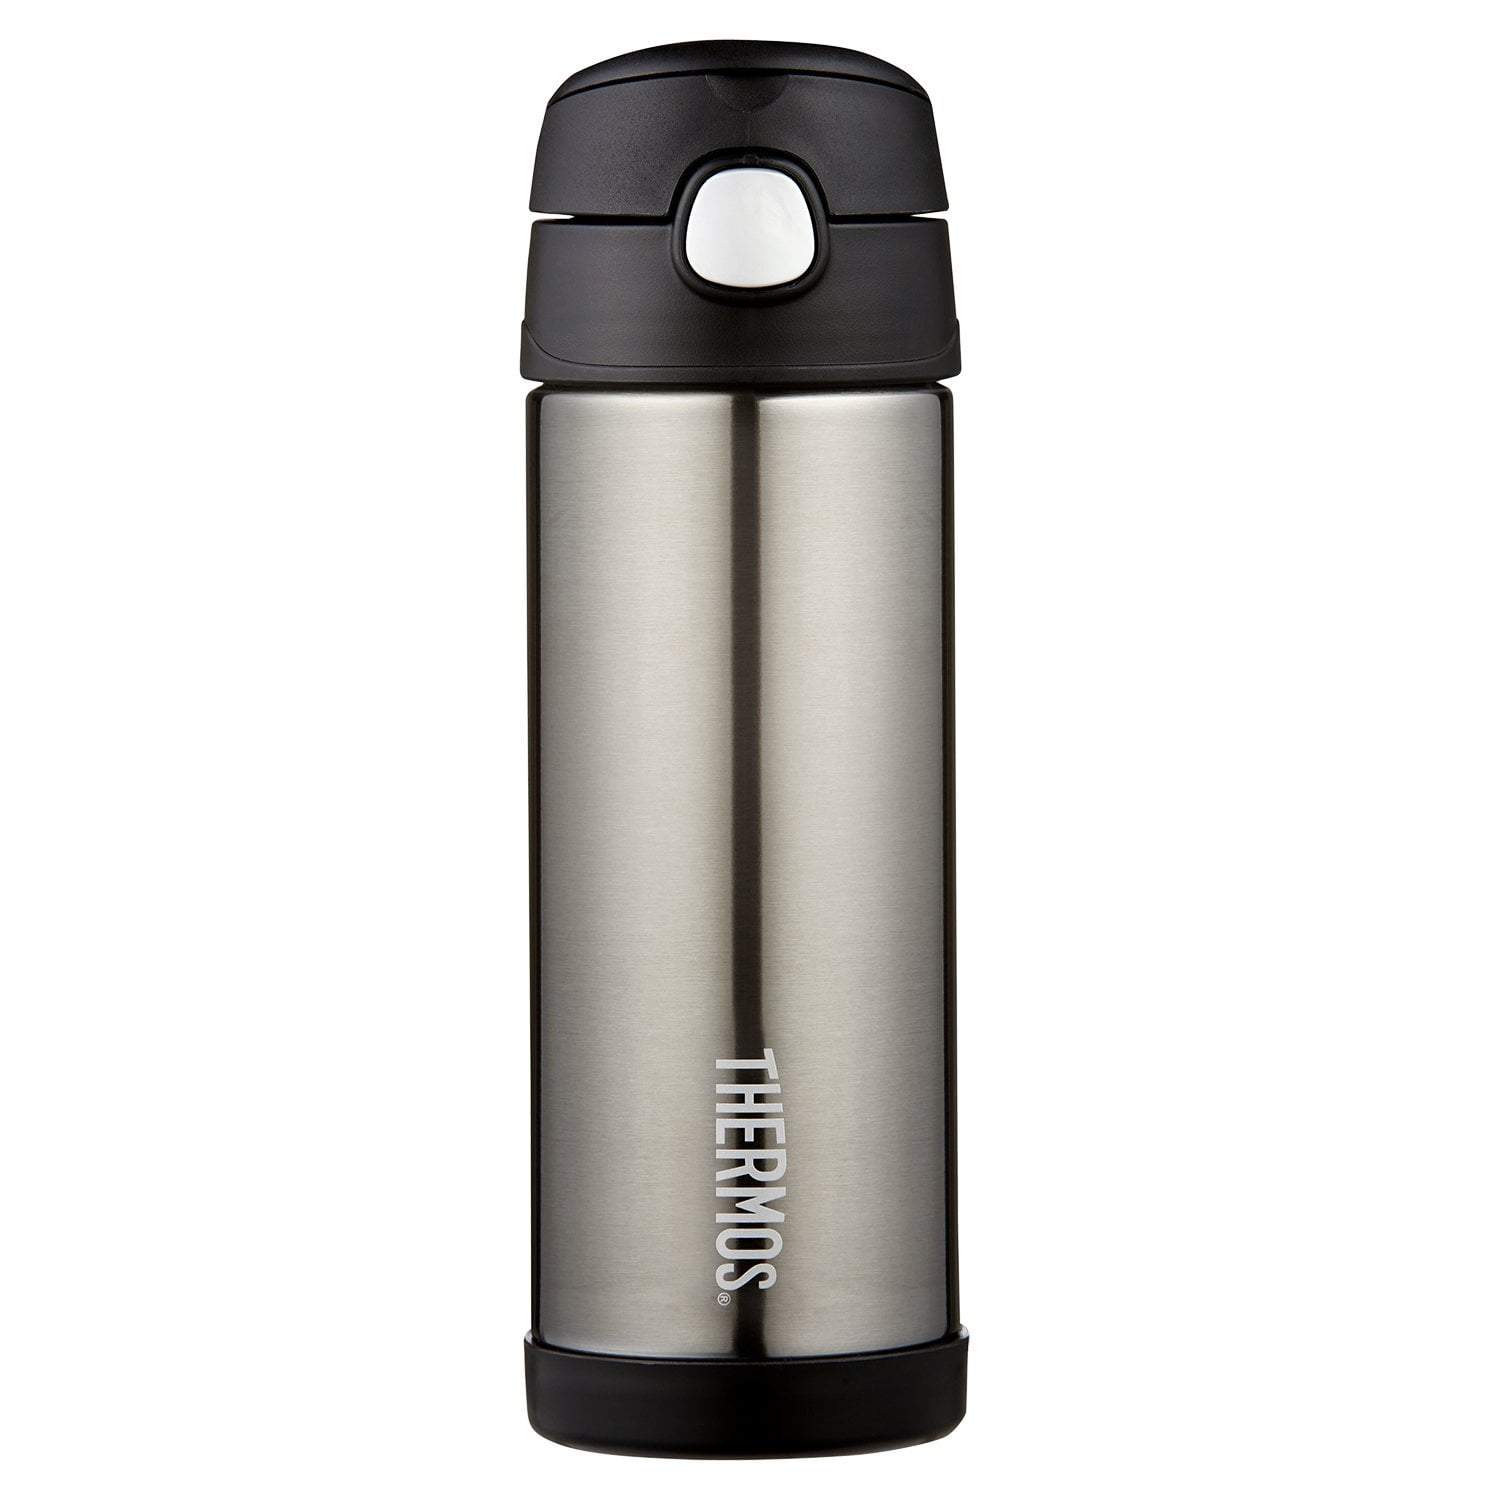 https://cdn.shopify.com/s/files/1/1416/1268/products/thermos-funtainer-stainless-steel-vacuum-insulated-bottle-470ml-charcoal-15137053016145.jpg?v=1648175811&width=1500